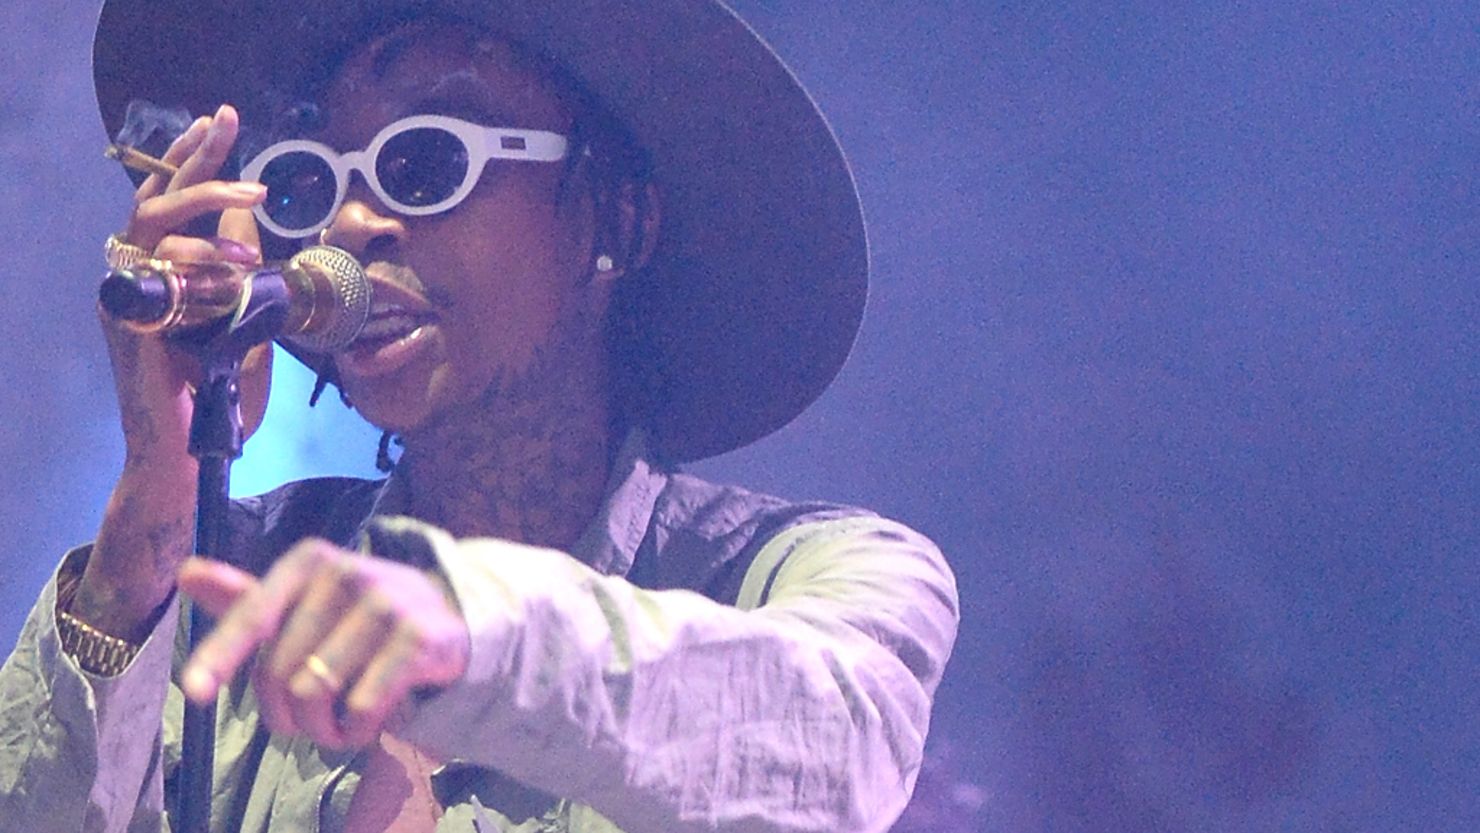 Wiz Khalifa performs during the 2014 Bonnaroo Music and Arts Festival this summer in Tennessee.